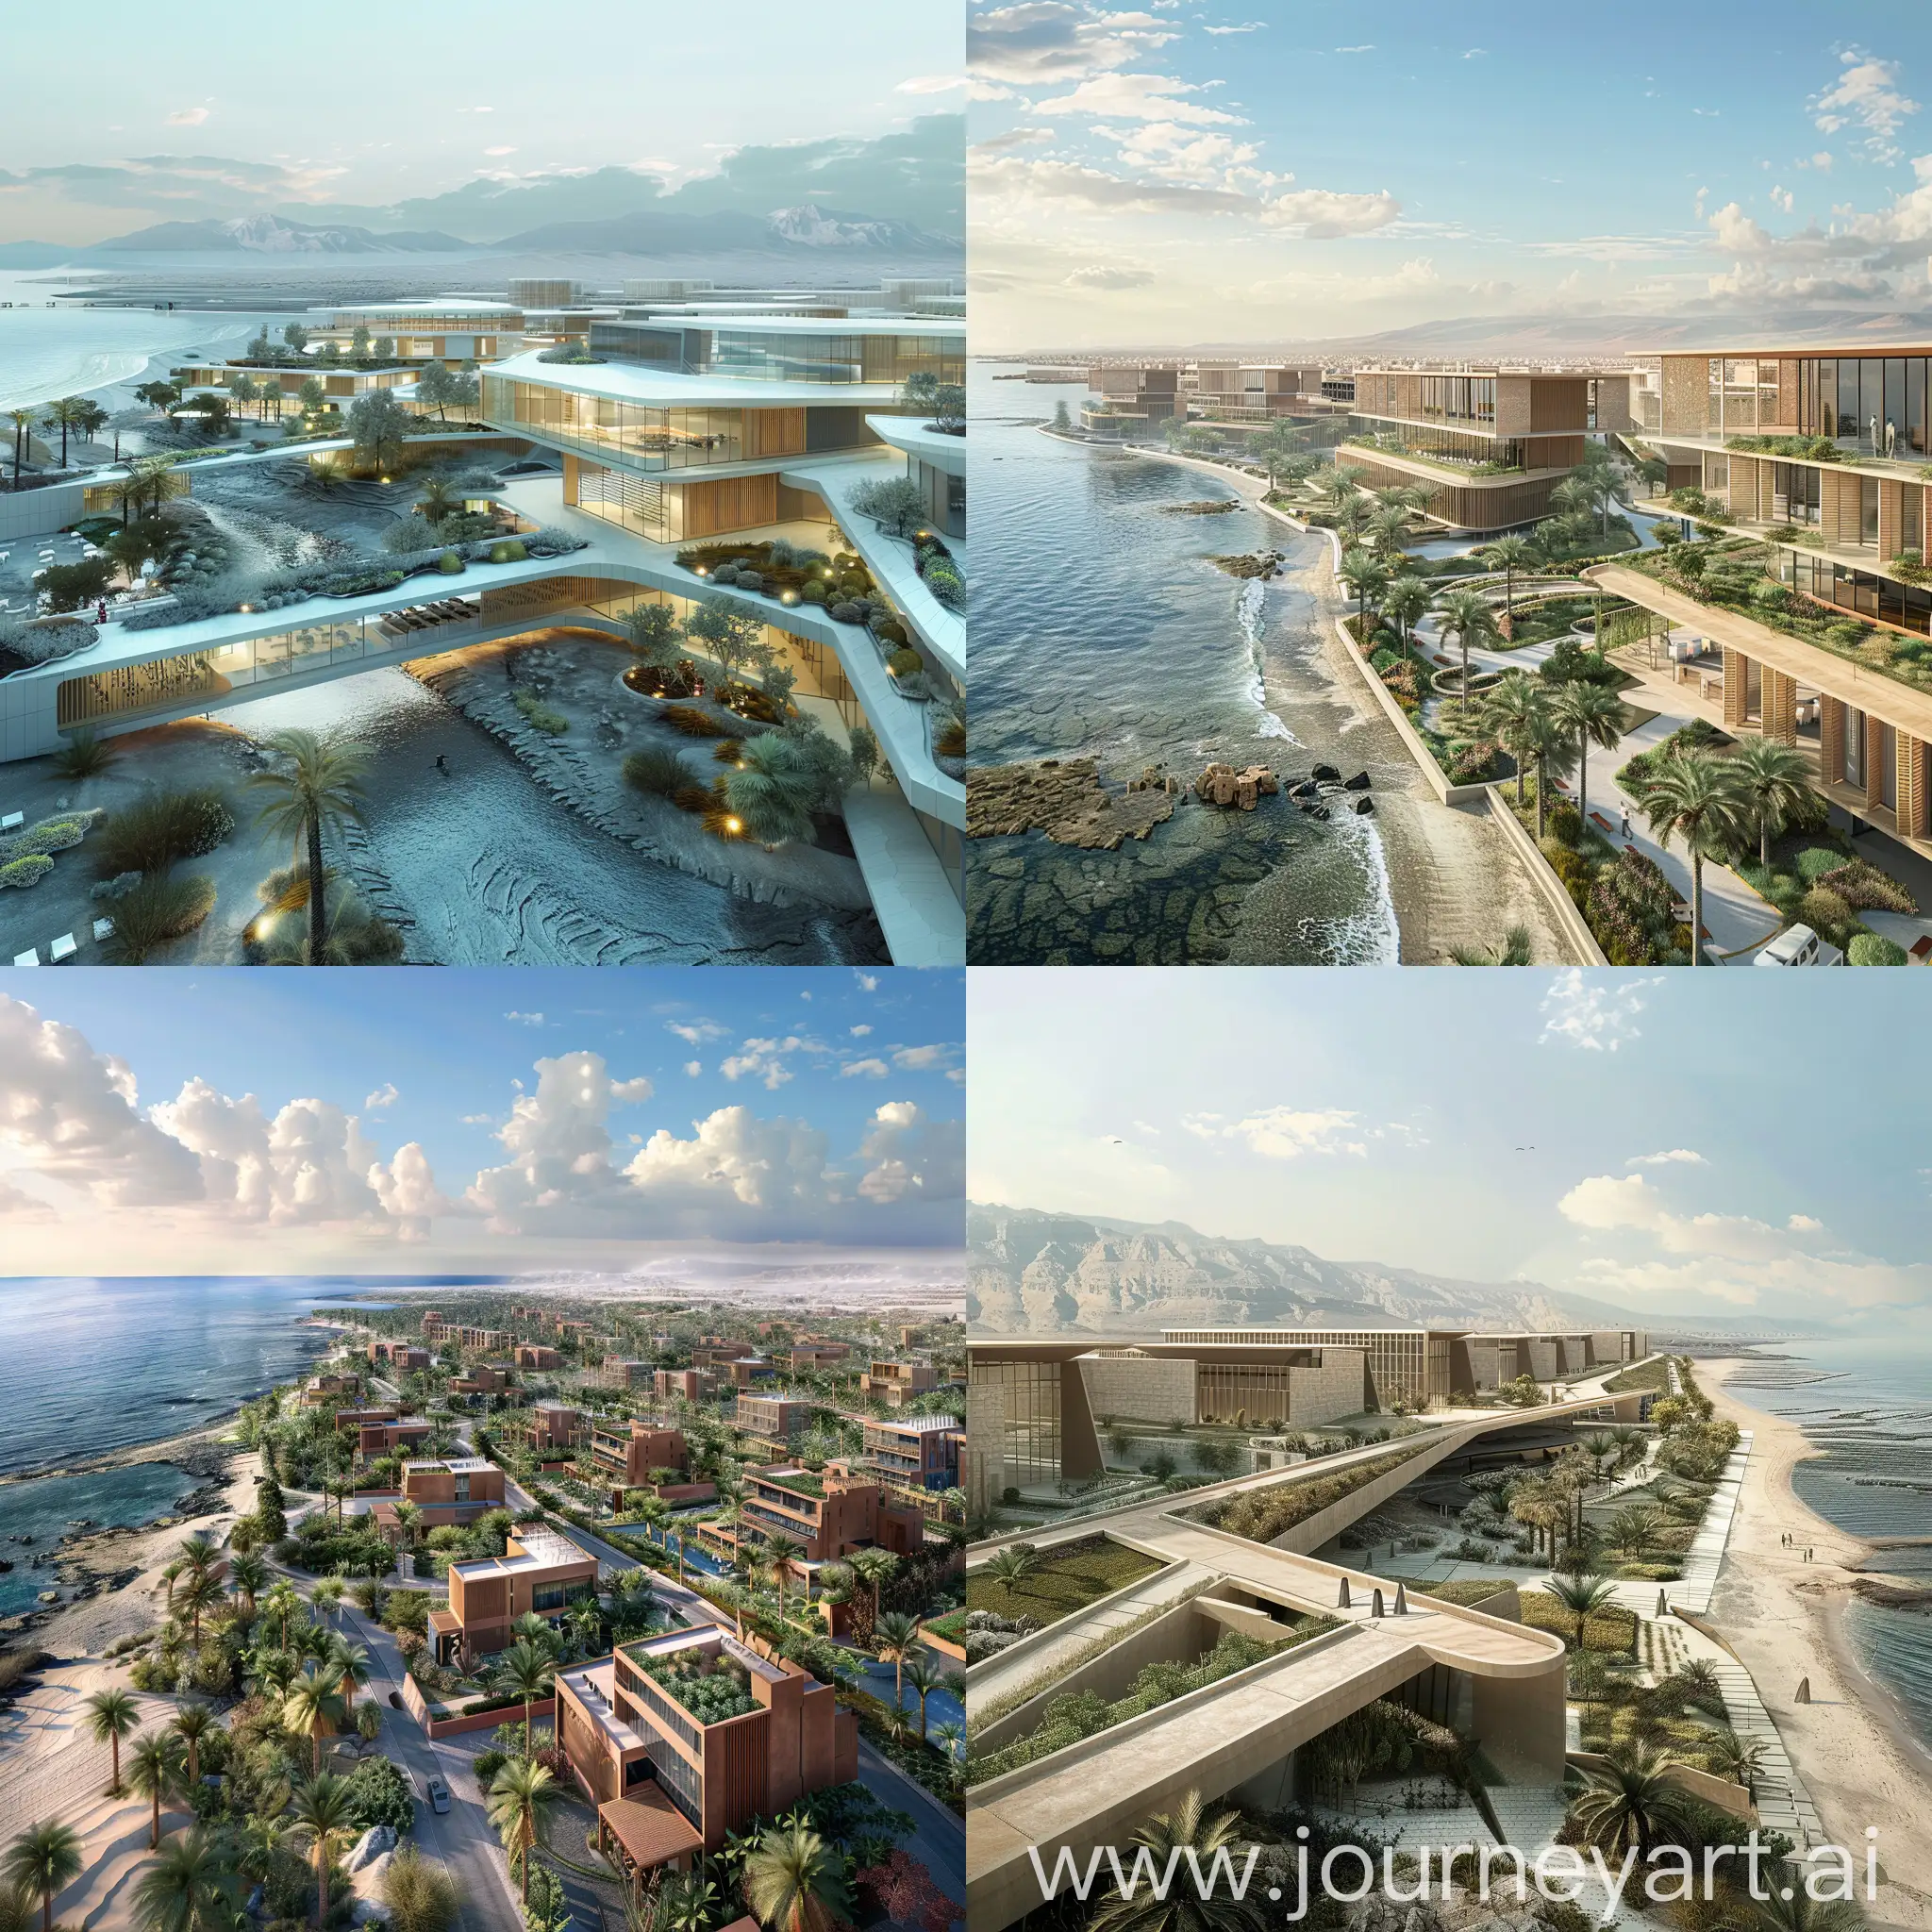 The Red Sea Coastal Complex in El Quseir, Egypt, is an architecturally integrated project along the Red Sea shoreline. Comprising administrative, office, medical, recreational, and hotel buildings, the design seamlessly blends modernity with the coastal environment. Focused on sustainability, the complex features energy-efficient systems, native landscaping, and a coastal-inspired palette. It aims to provide a harmonious and functional space that enhances the natural beauty of the location, catering to diverse needs while fostering a sense of community and well-being.